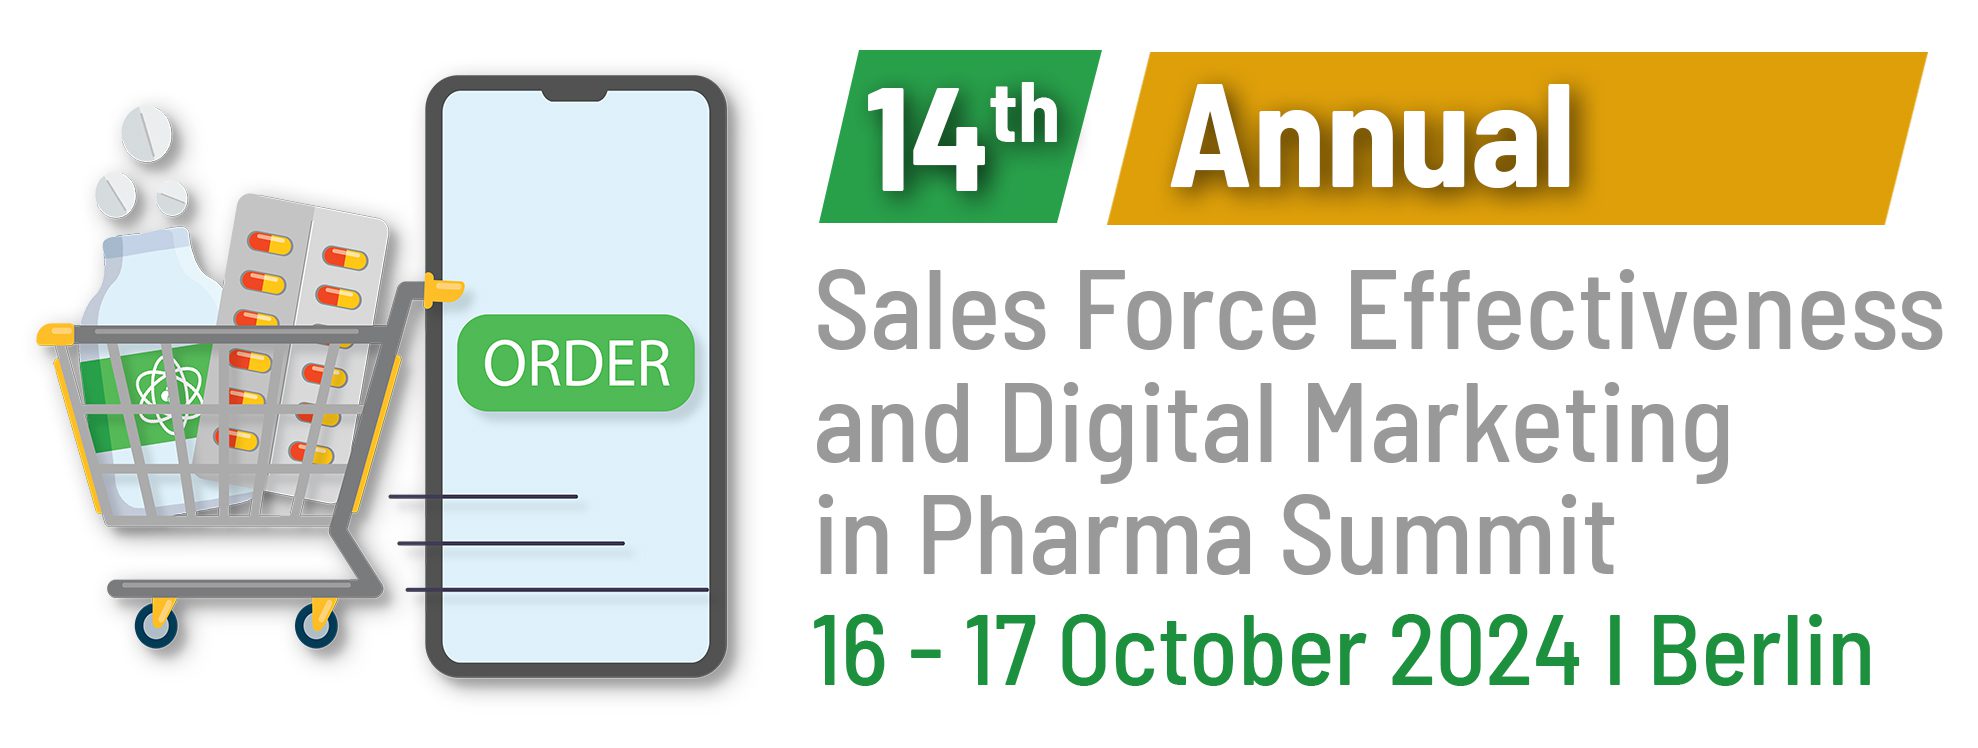 14th Annual Sales Force Effectiveness and Digital Marketing in Pharma Summit